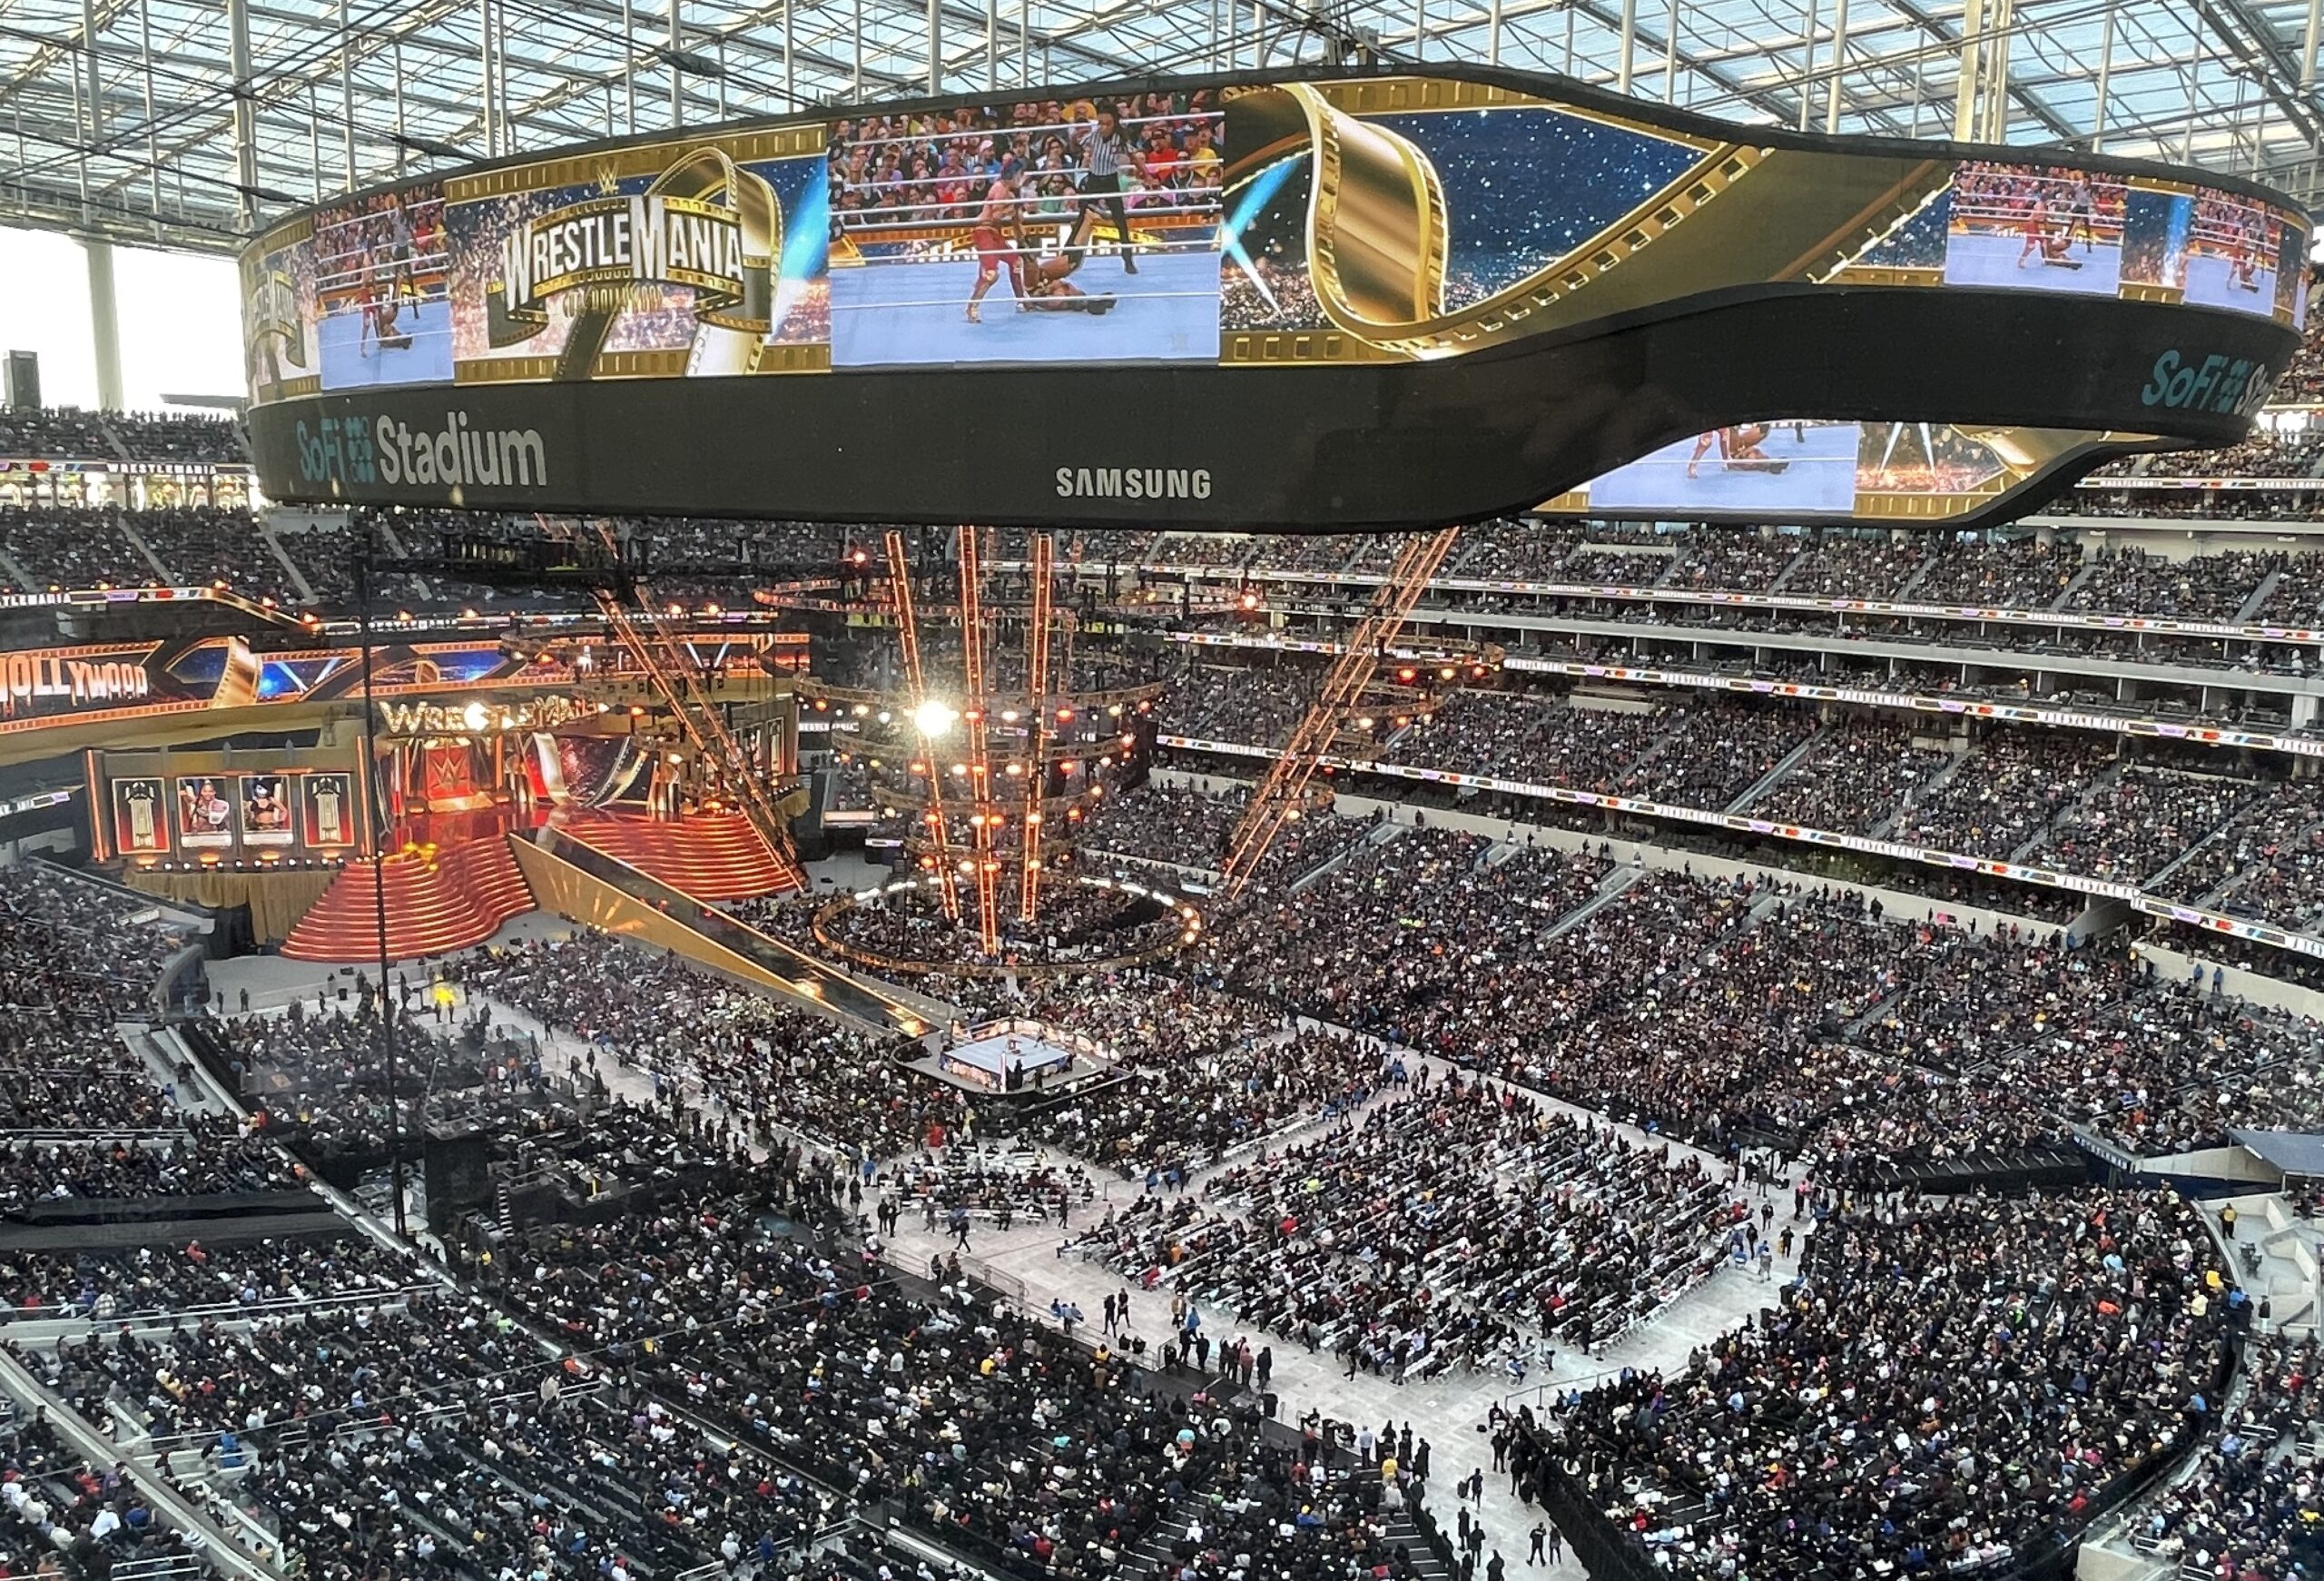 WWE WrestleMania 39: What To Expect in Los Angeles